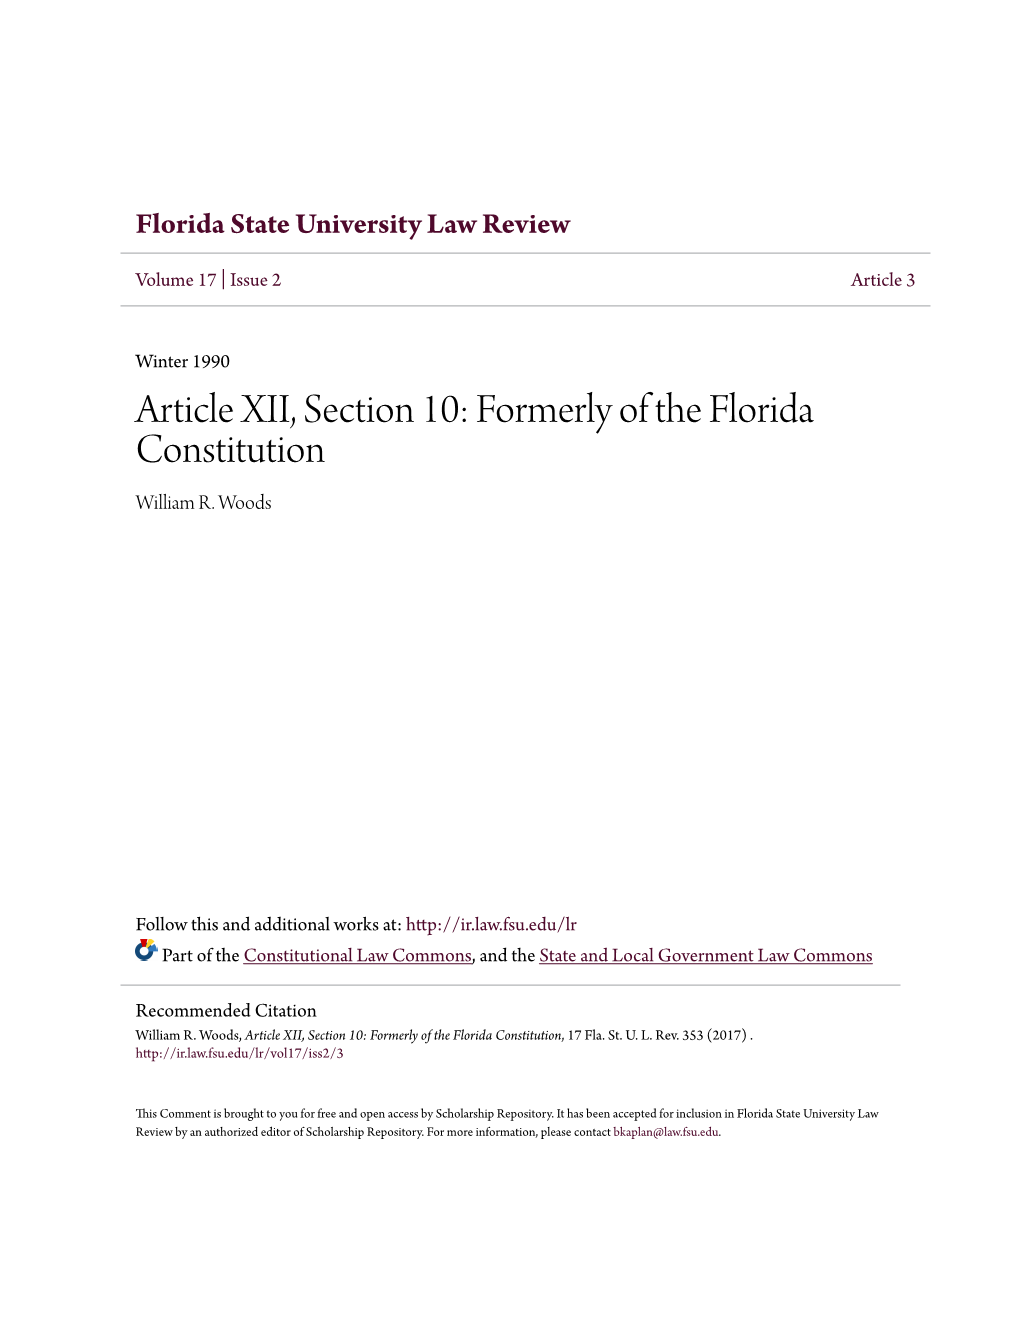 Article XII, Section 10: Formerly of the Florida Constitution William R